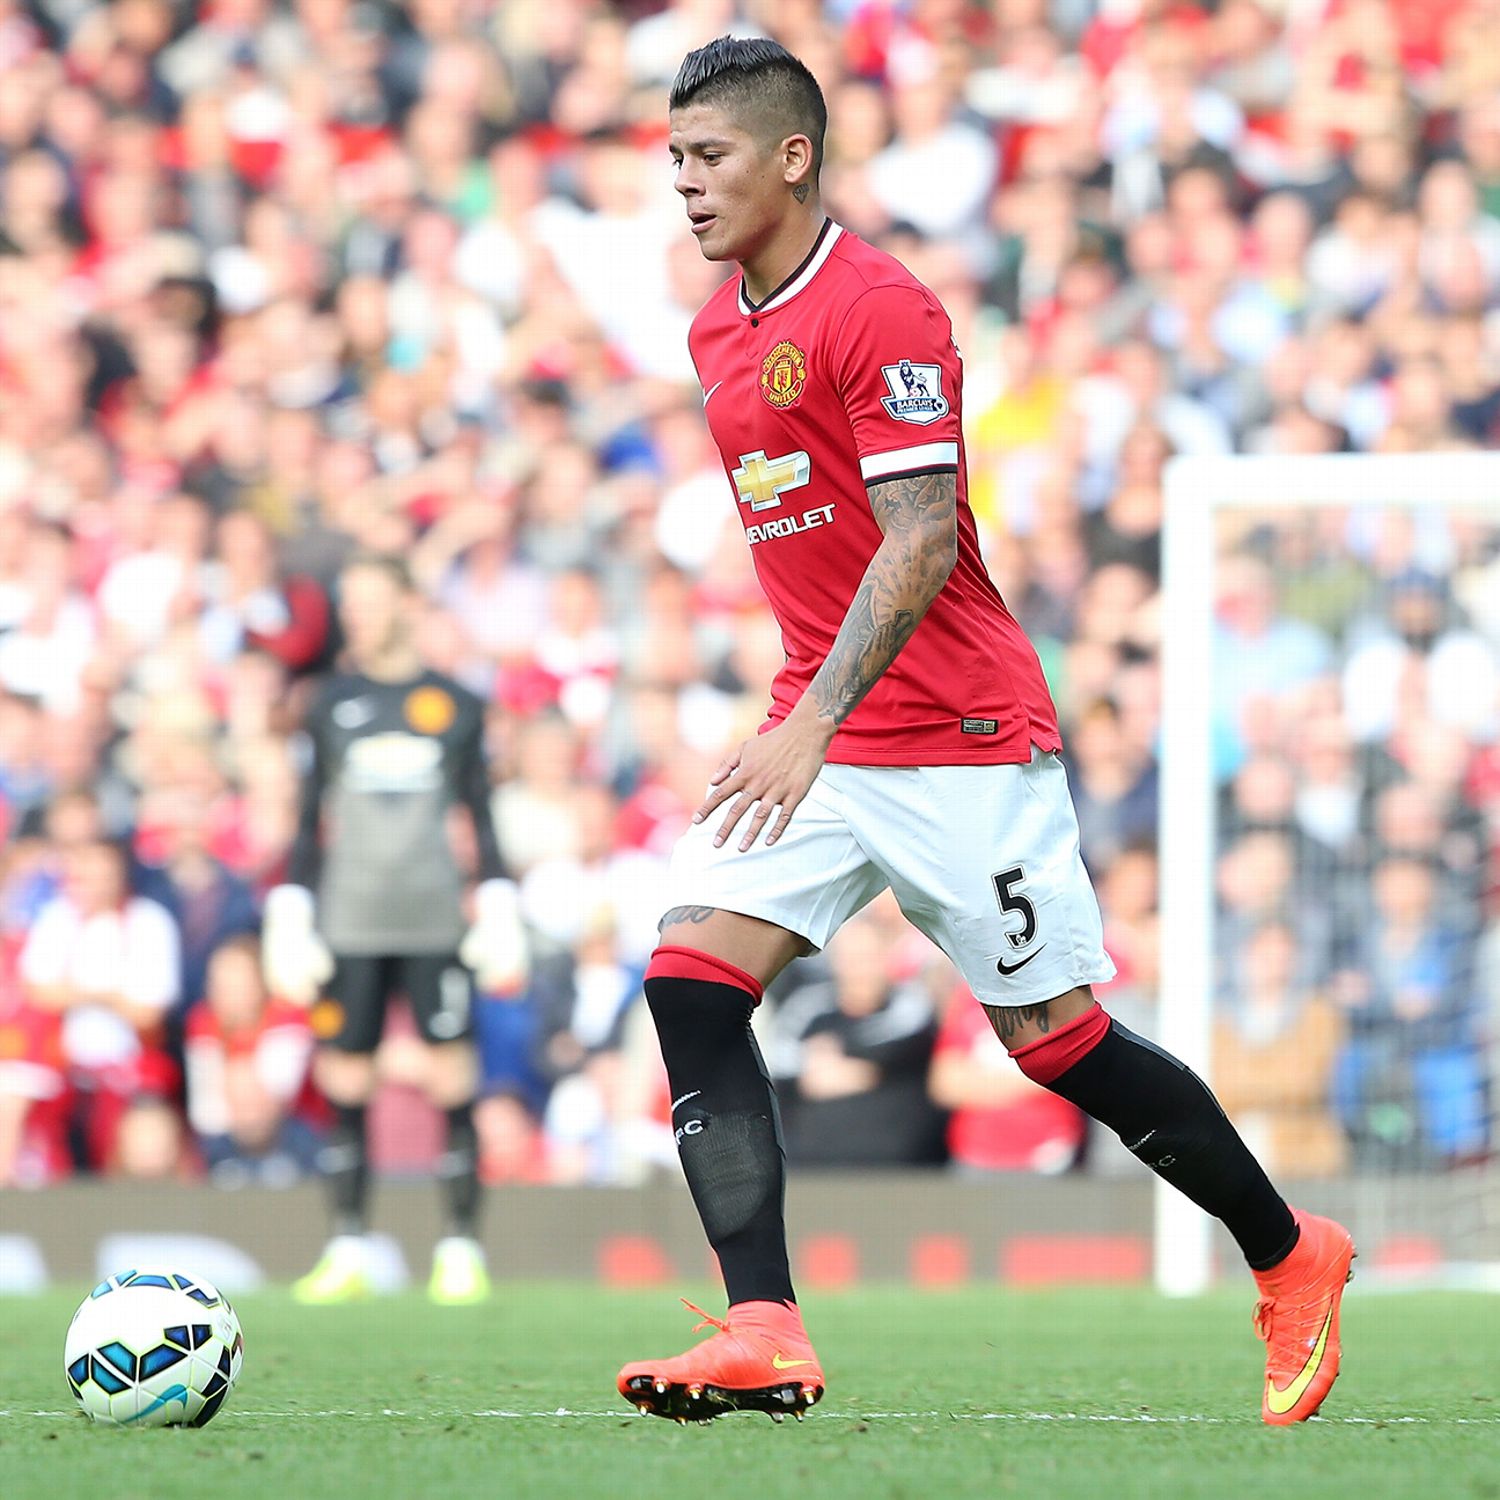 Manchester United's Marcos Rojo to return from injury in 'less than six weeks' - ESPN FC